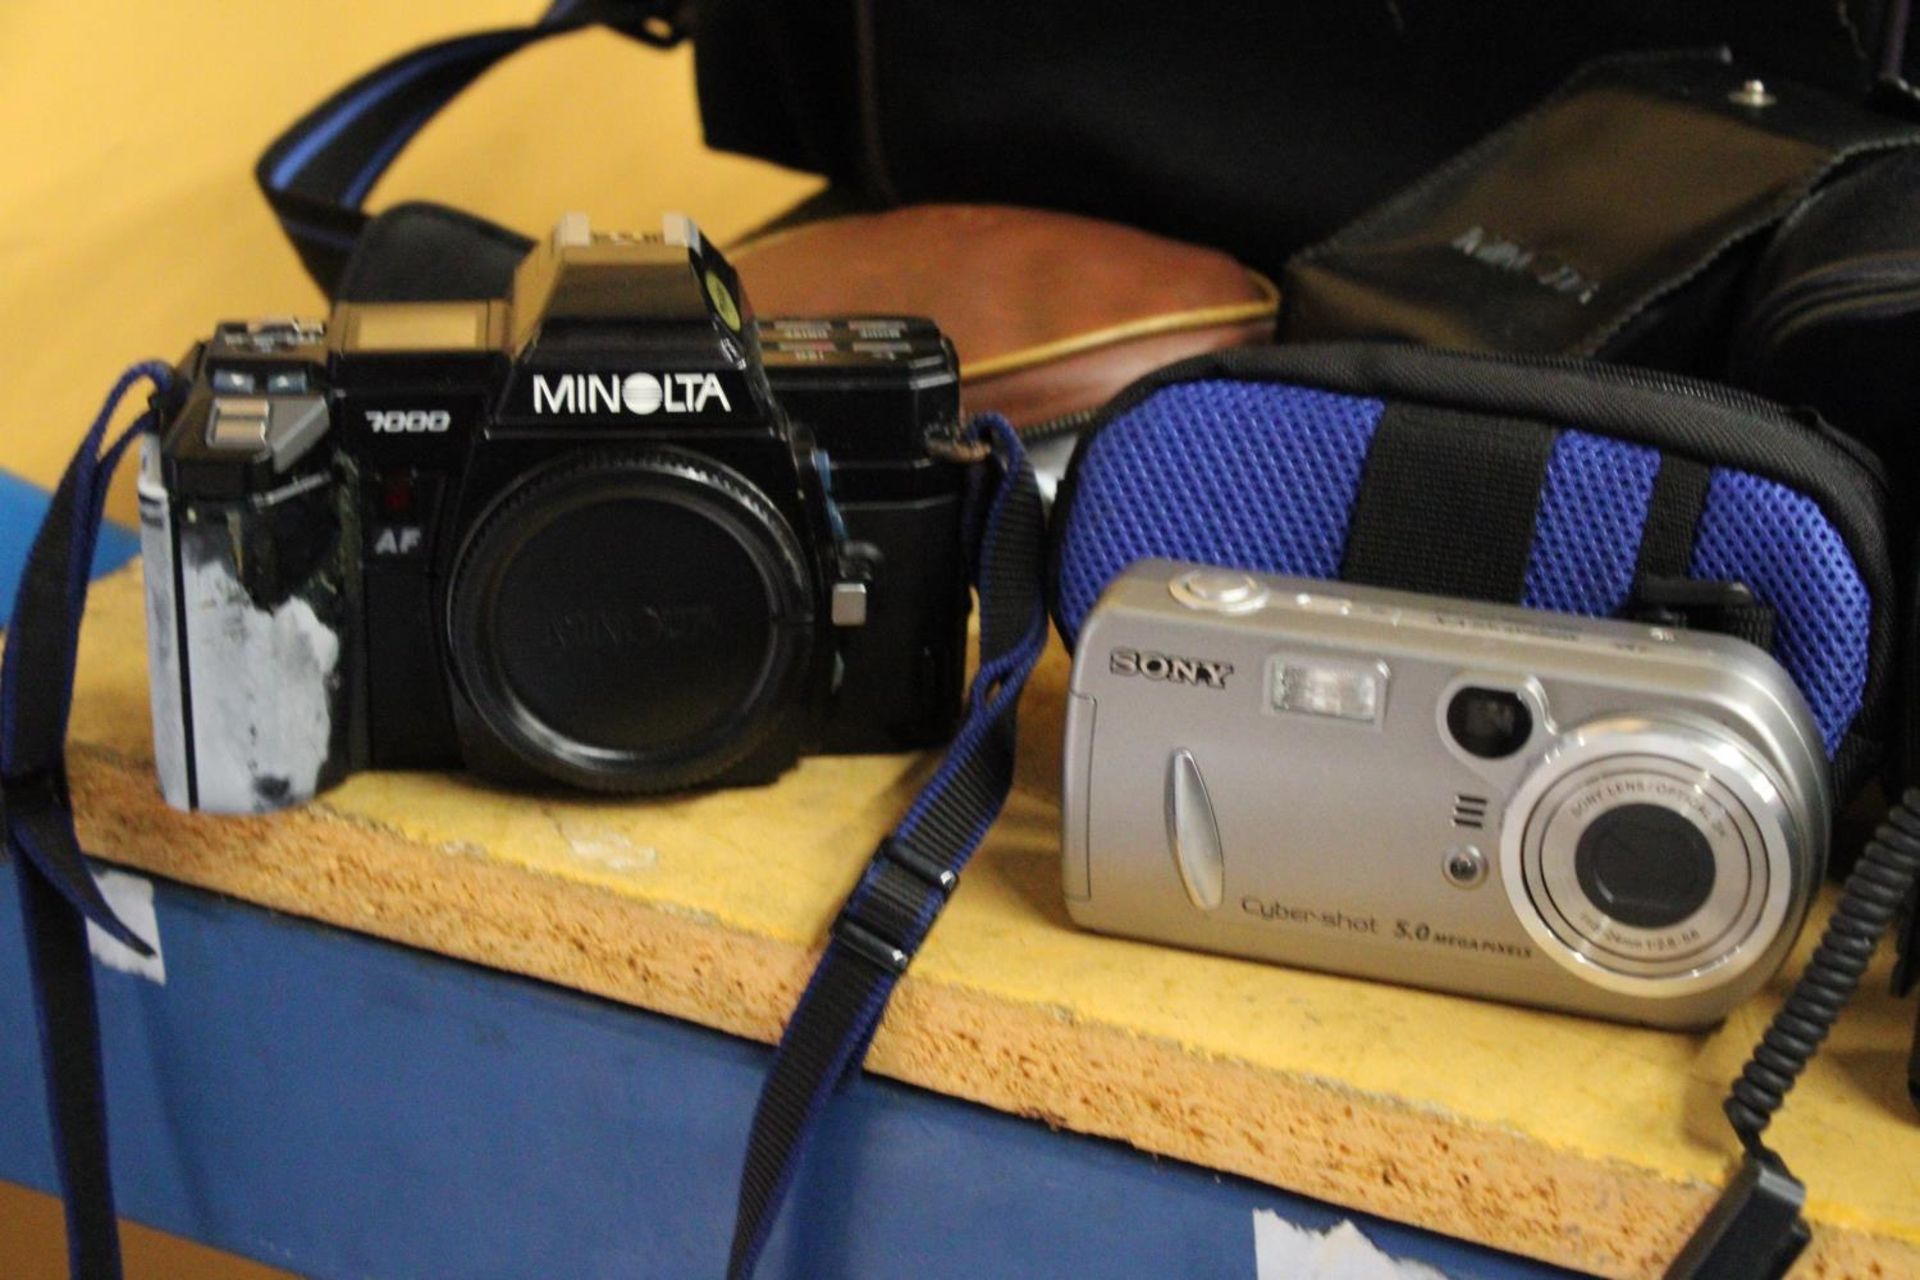 A COLLECTION OF VINTAGE CAMERAS TO INCLUDE A SIX 20 KODAK, AGILUX AGIFLASH, SONY CYBERSHOT, KONICA - Image 5 of 7